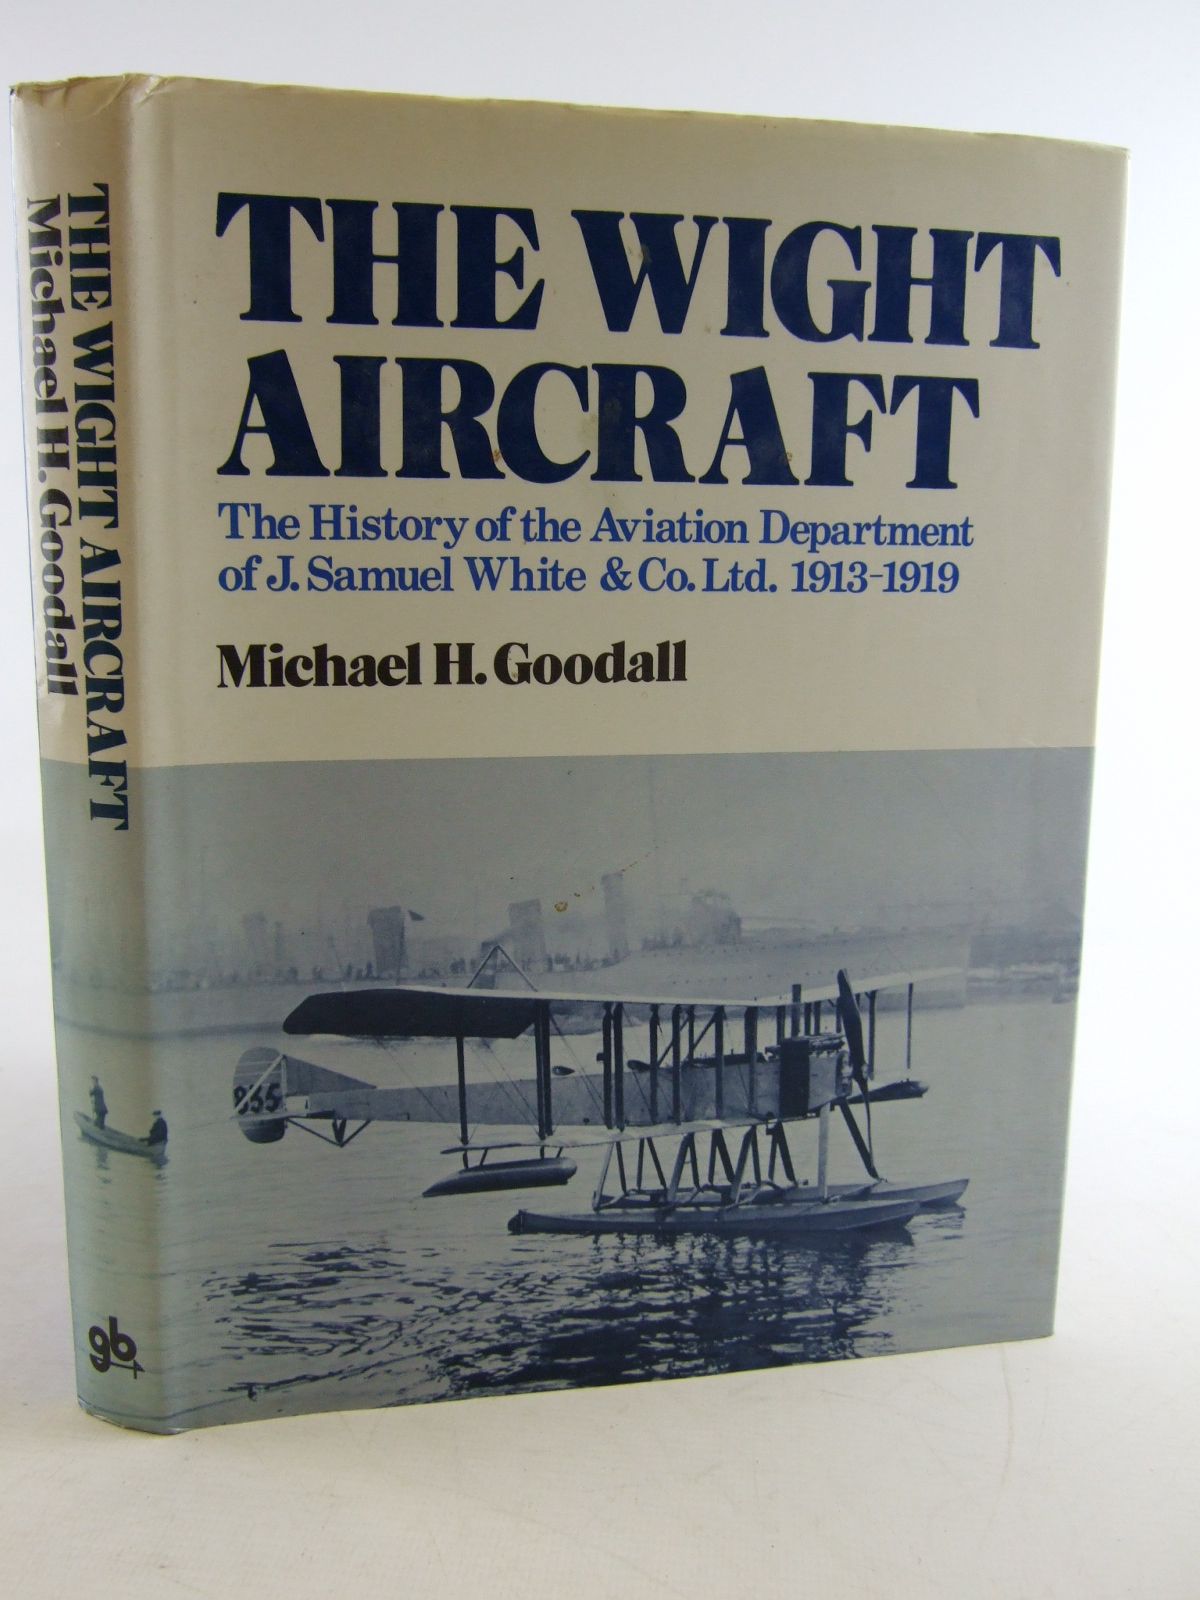 Stella & Rose's Books : THE WIGHT AIRCRAFT Written By Michael H ...